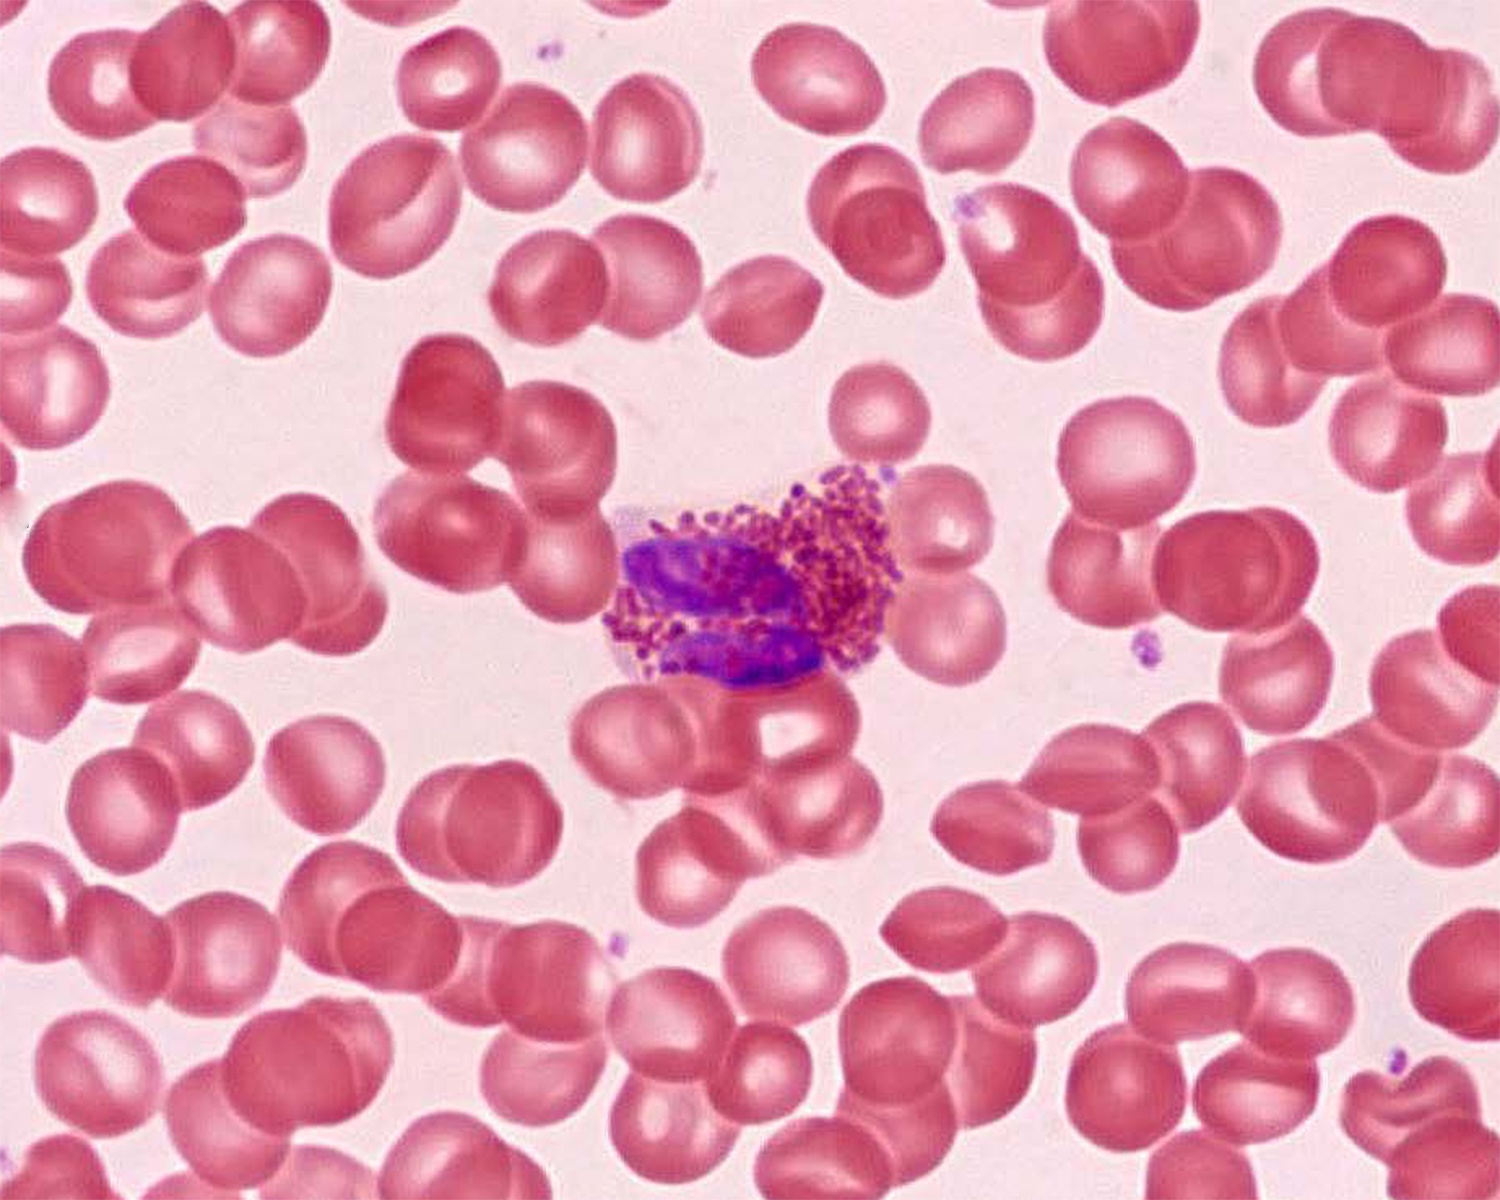 Blood Under A Microscope Part 1 Red Blood Cells Neutrophils